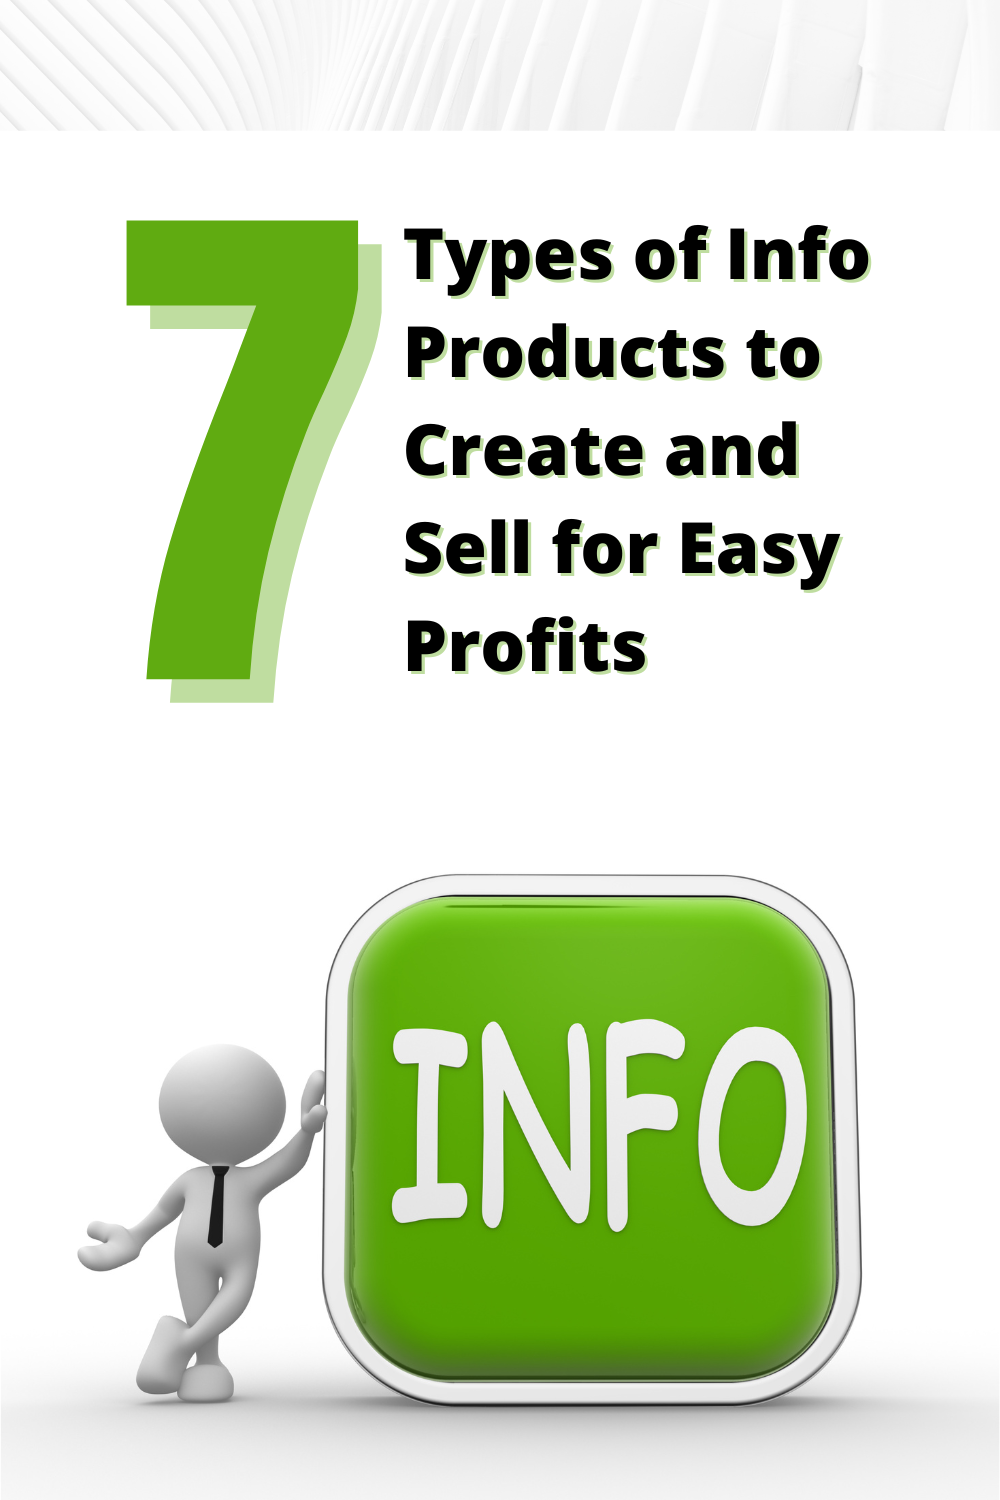 7 Types of Info Products to Create and Sell for Easy Profits